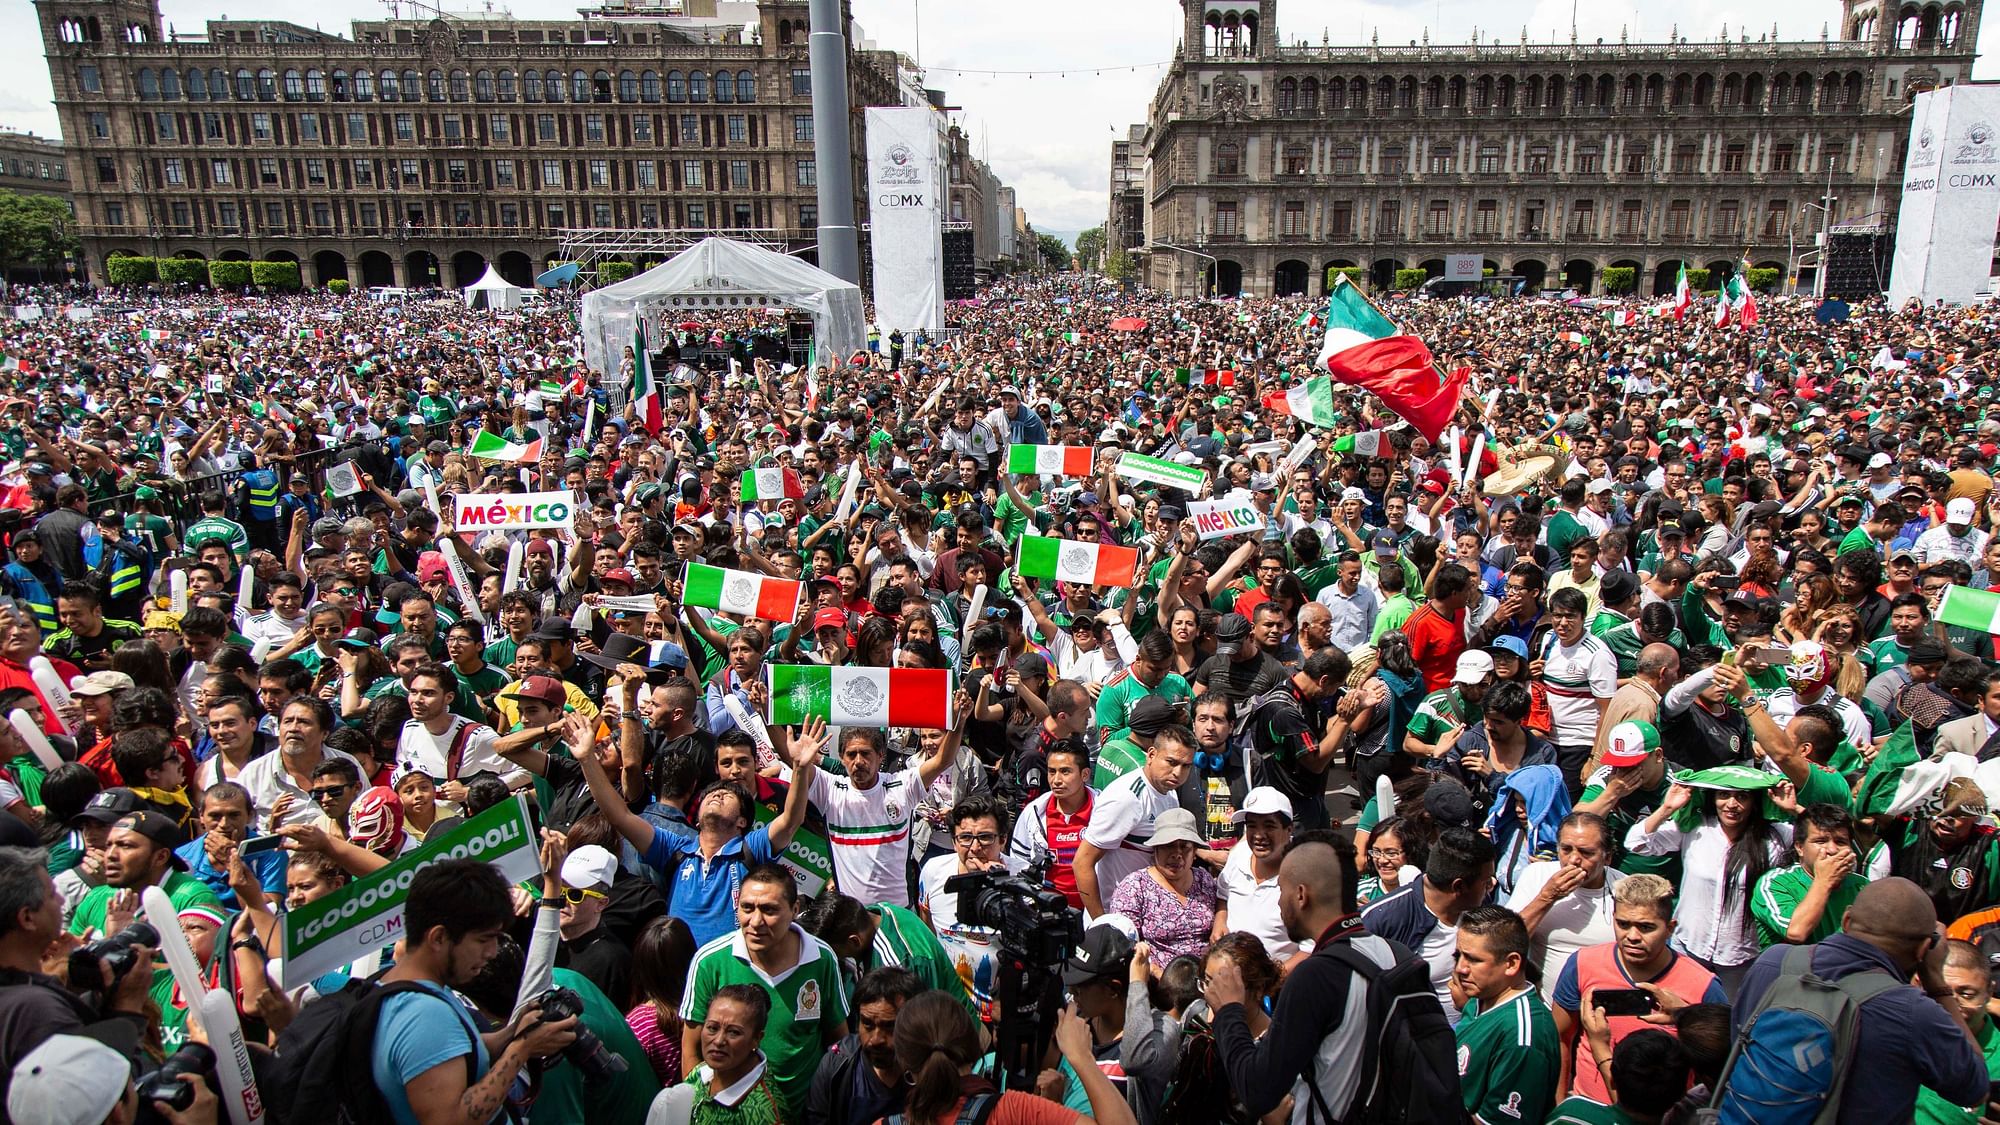 Fan’s celebrate Mexico’s win during the Mexico vs Germany World Cup zocalo viewing Mexico City, Sunday, June 17, 2018. Mexico won it’s first match against Germany 1-0.&nbsp;